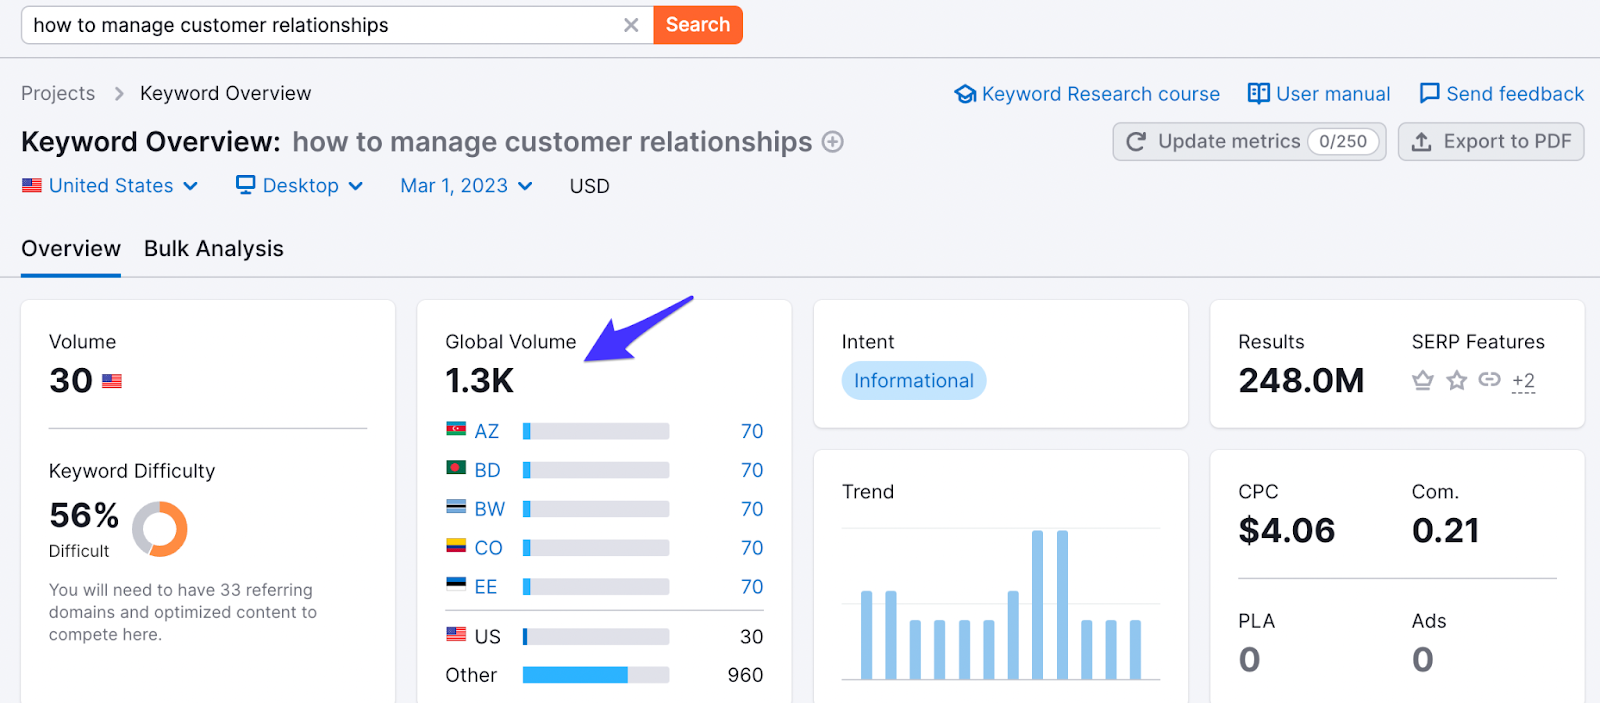 an example of keyword statistics to show how powerful bofu content can be